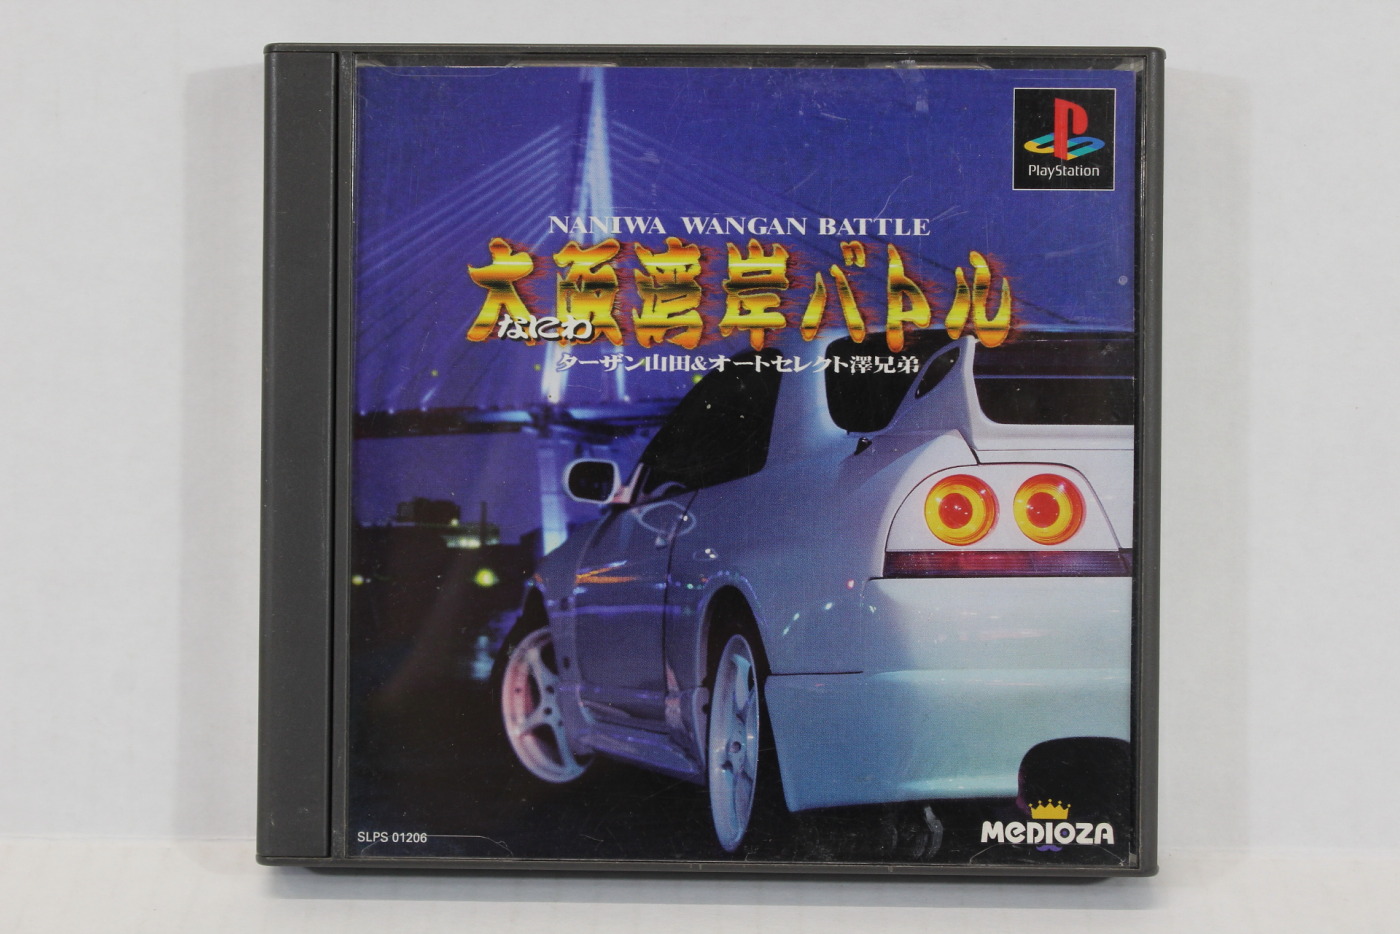 🕹️ Play Retro Games Online: Driver 2 (PS1)